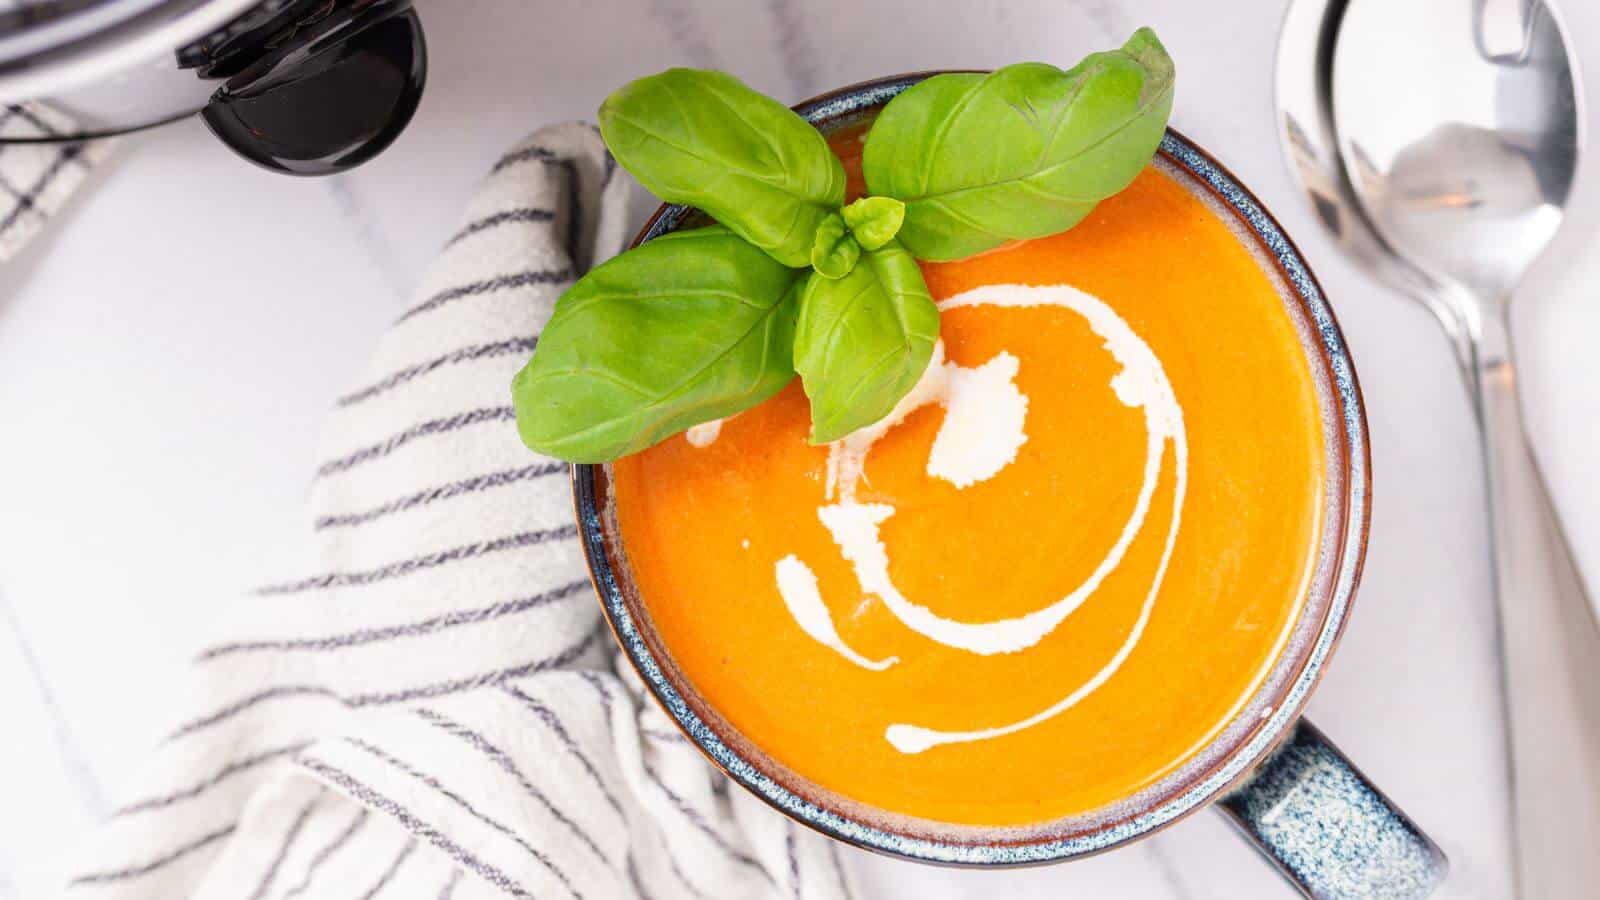 Top view of a bowl of creamy tomato soup garnished with basil, served with a spoon and sunglasses on the side.